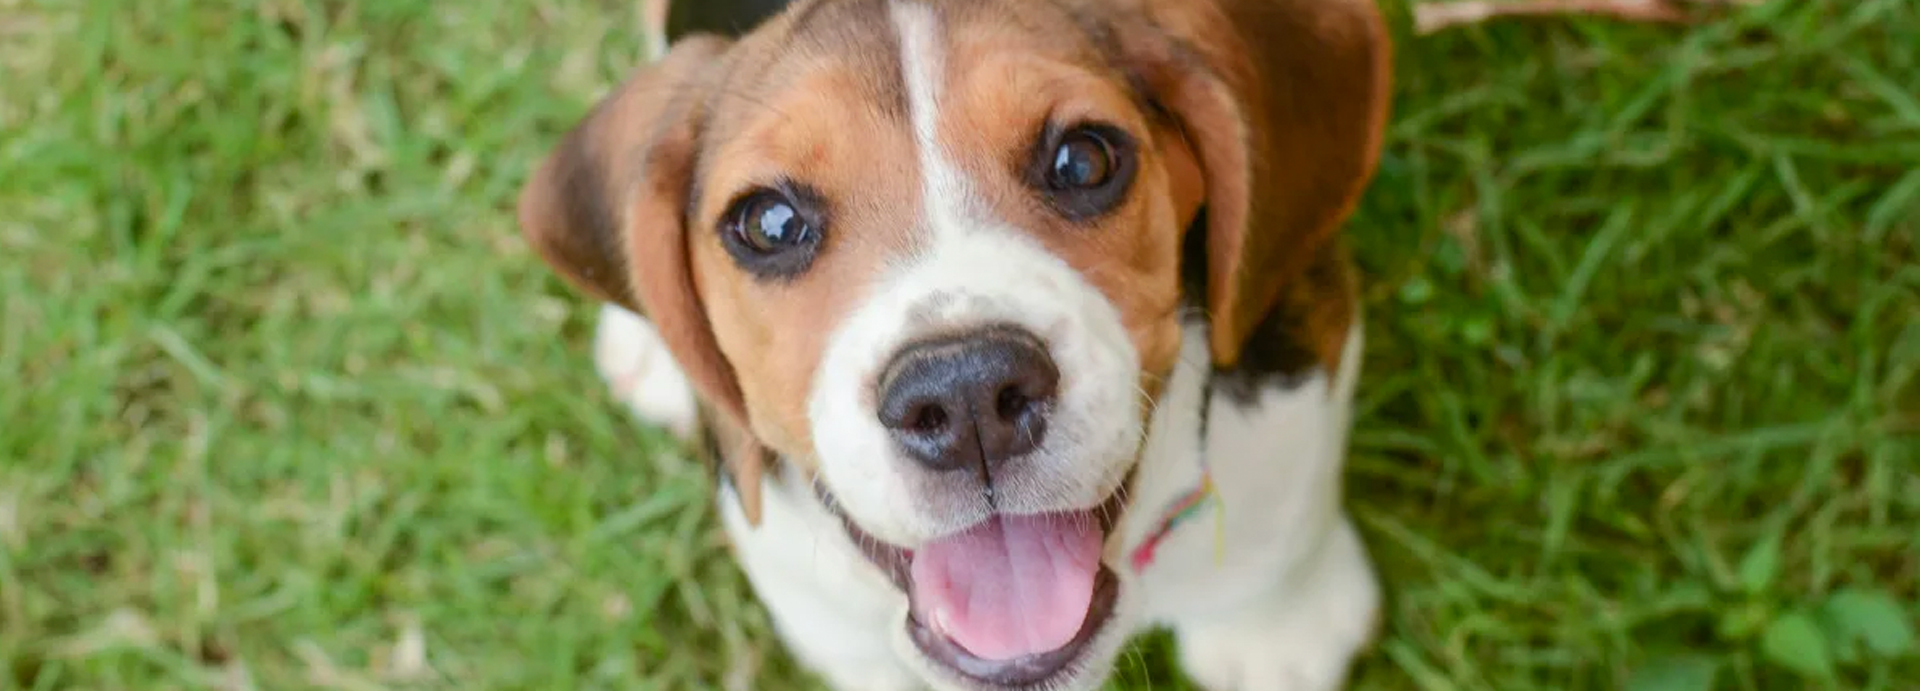 Beagle Can't Contain His Happiness in New Home After 7 Years in a Laboratory